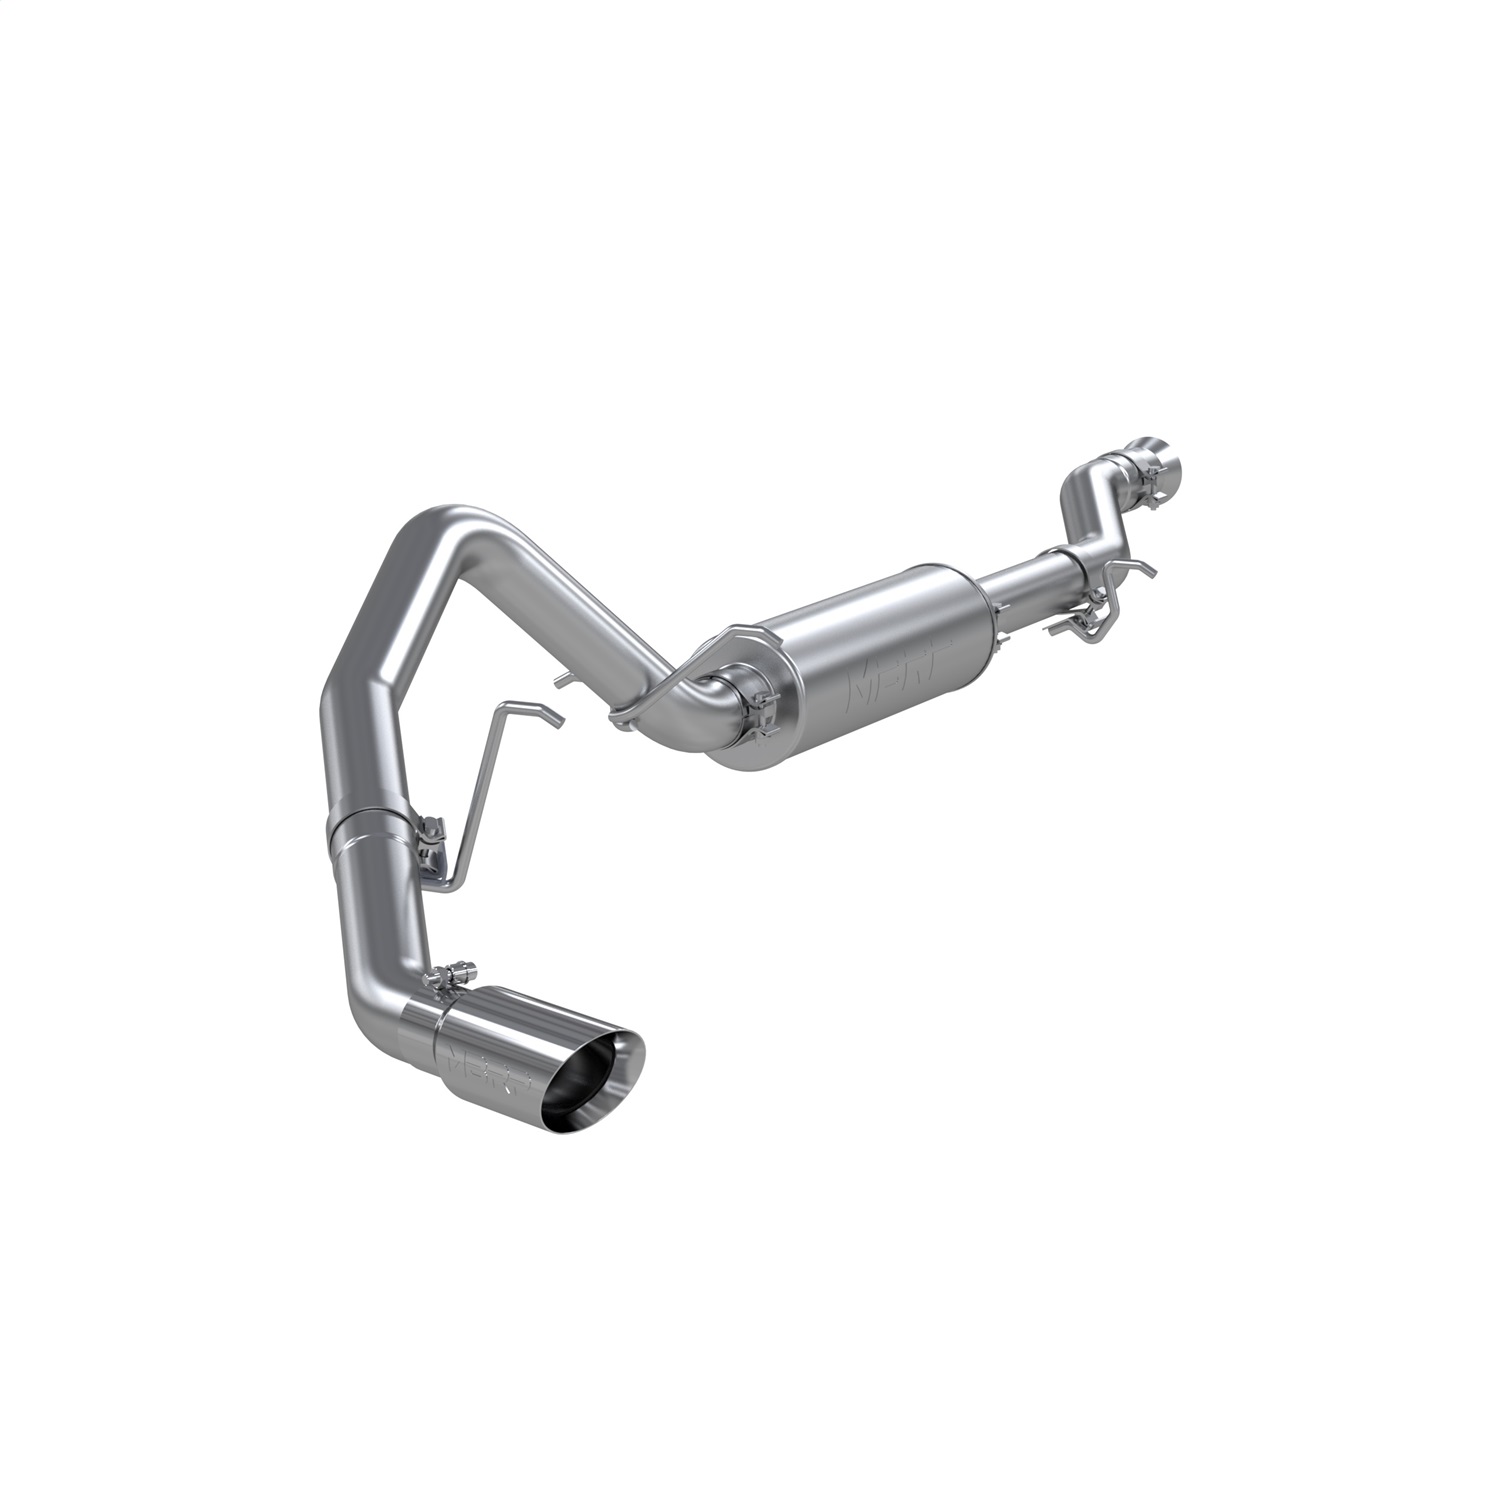 MBRP Exhaust S5043304 Armor Pro Cat Back Exhaust System